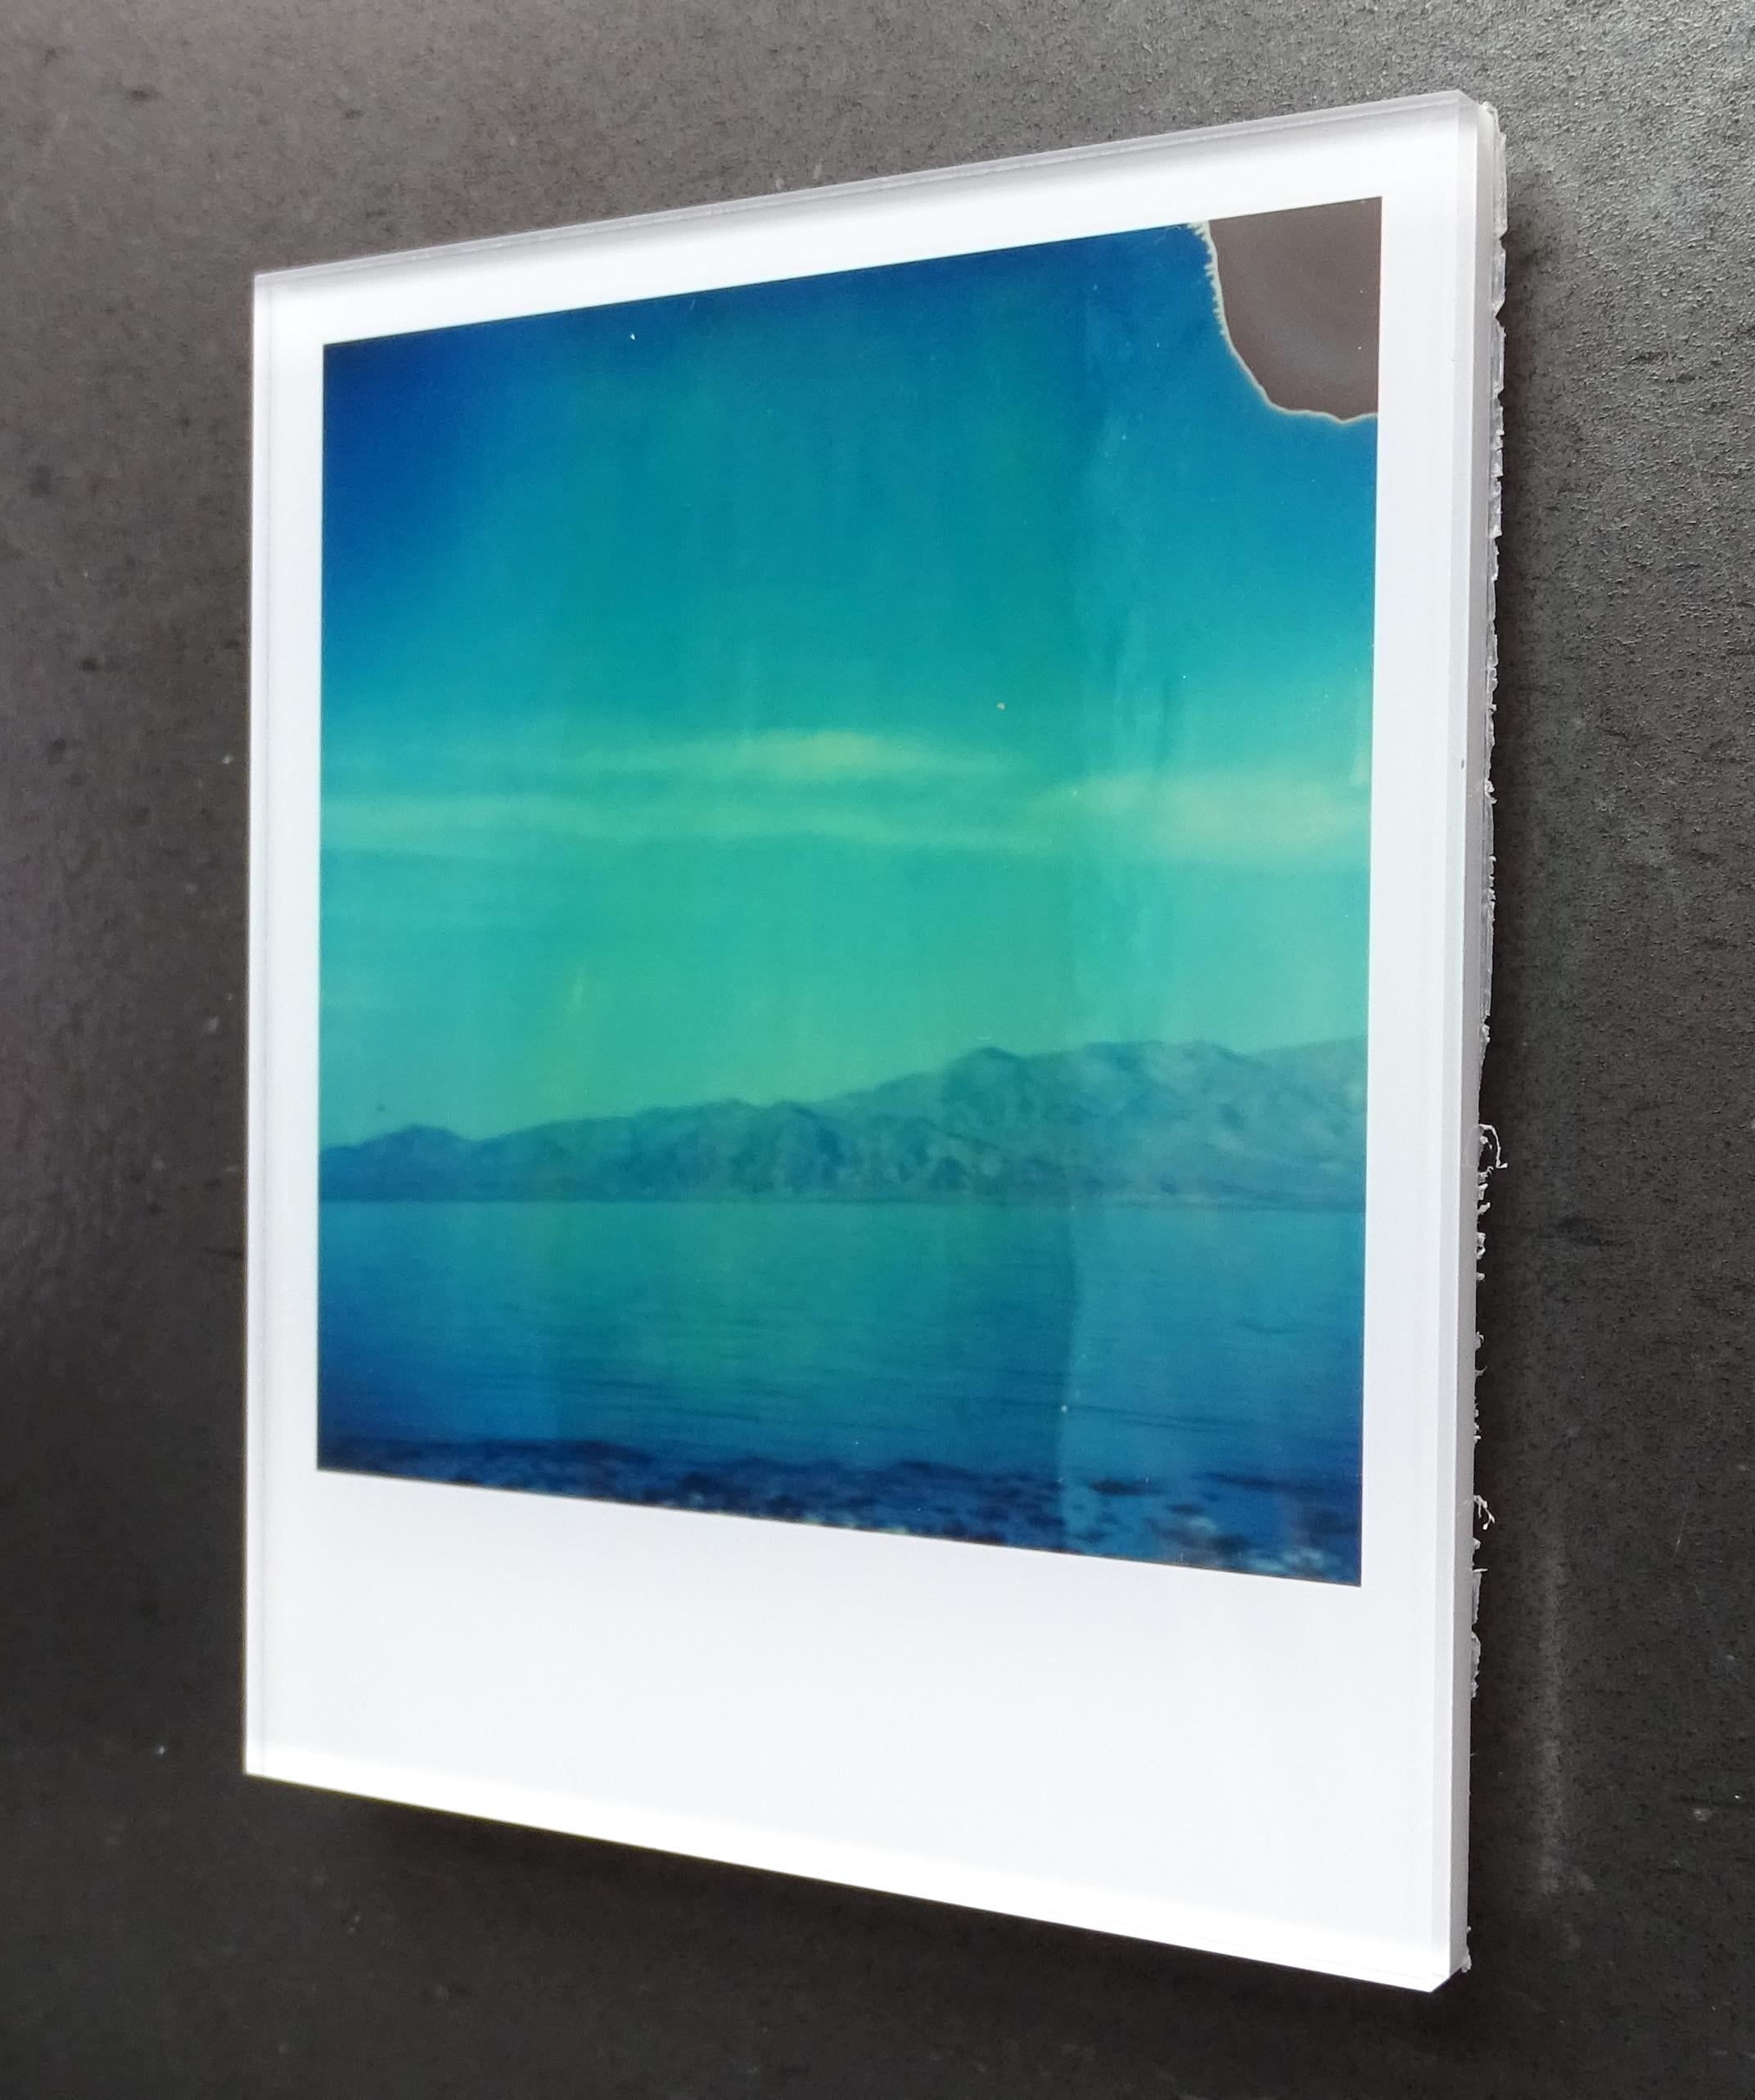 Stefanie Schneider's Minis - 
Through the looking Glass (California Badlands), 2010

Signed and signature brand on verso.
Lambda digital Color Photographs based on a Polaroid.
Sandwiched in between Plexiglass (thickness 0.7cm)

Polaroid sized open